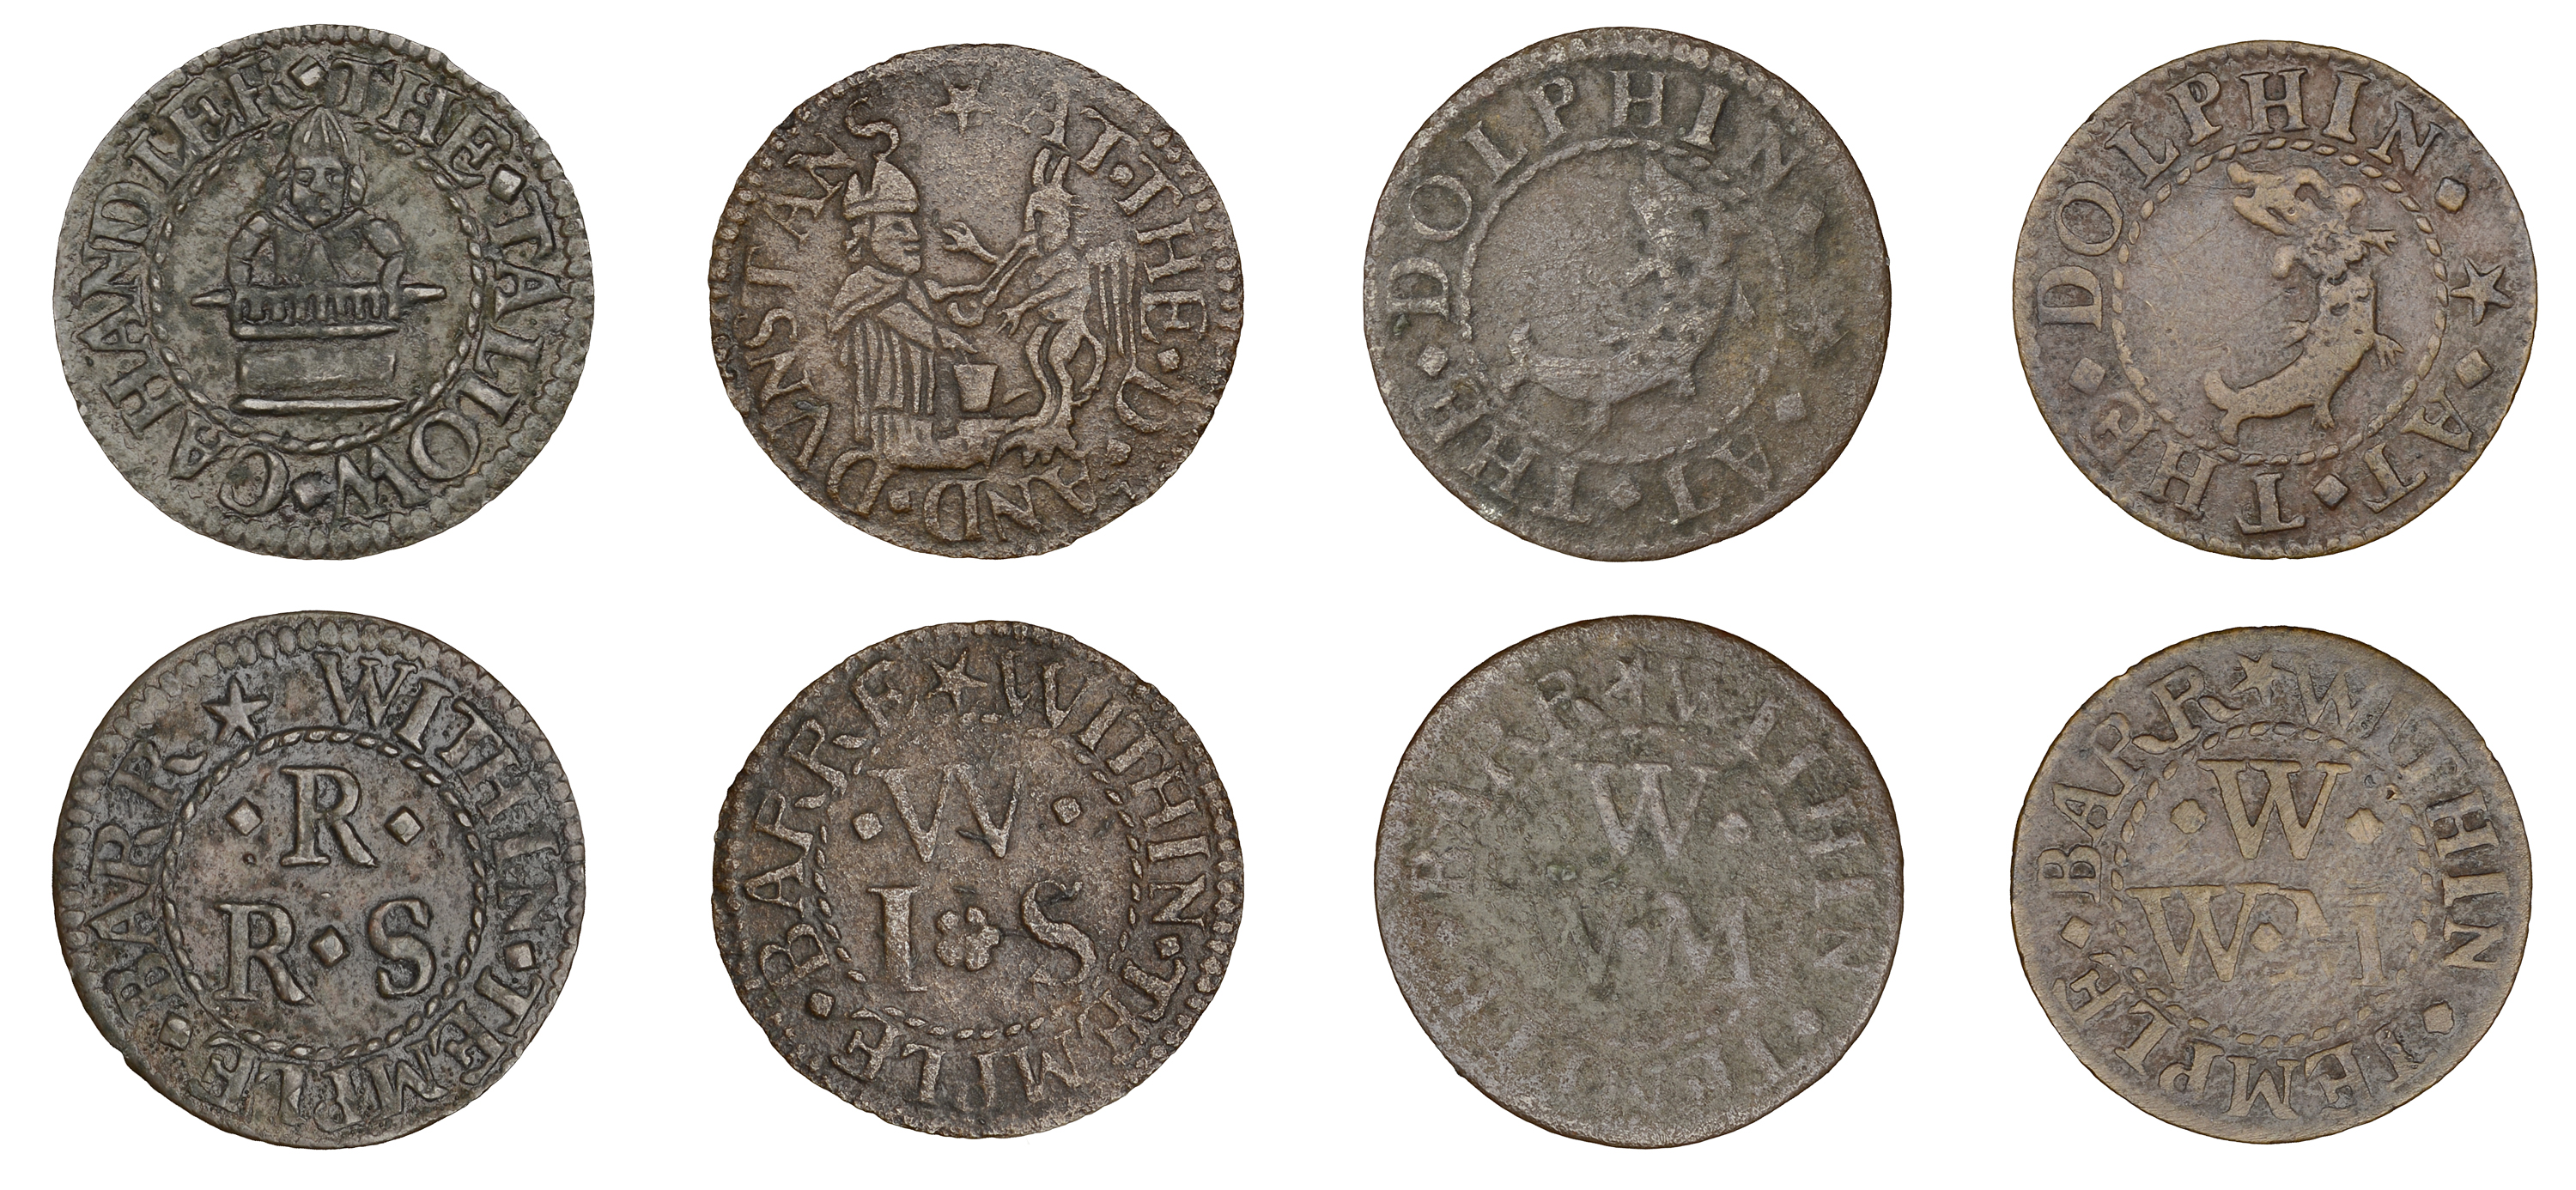 The Collection of 17th Century Tokens formed by the late Robert Thompson (Part III: Final)